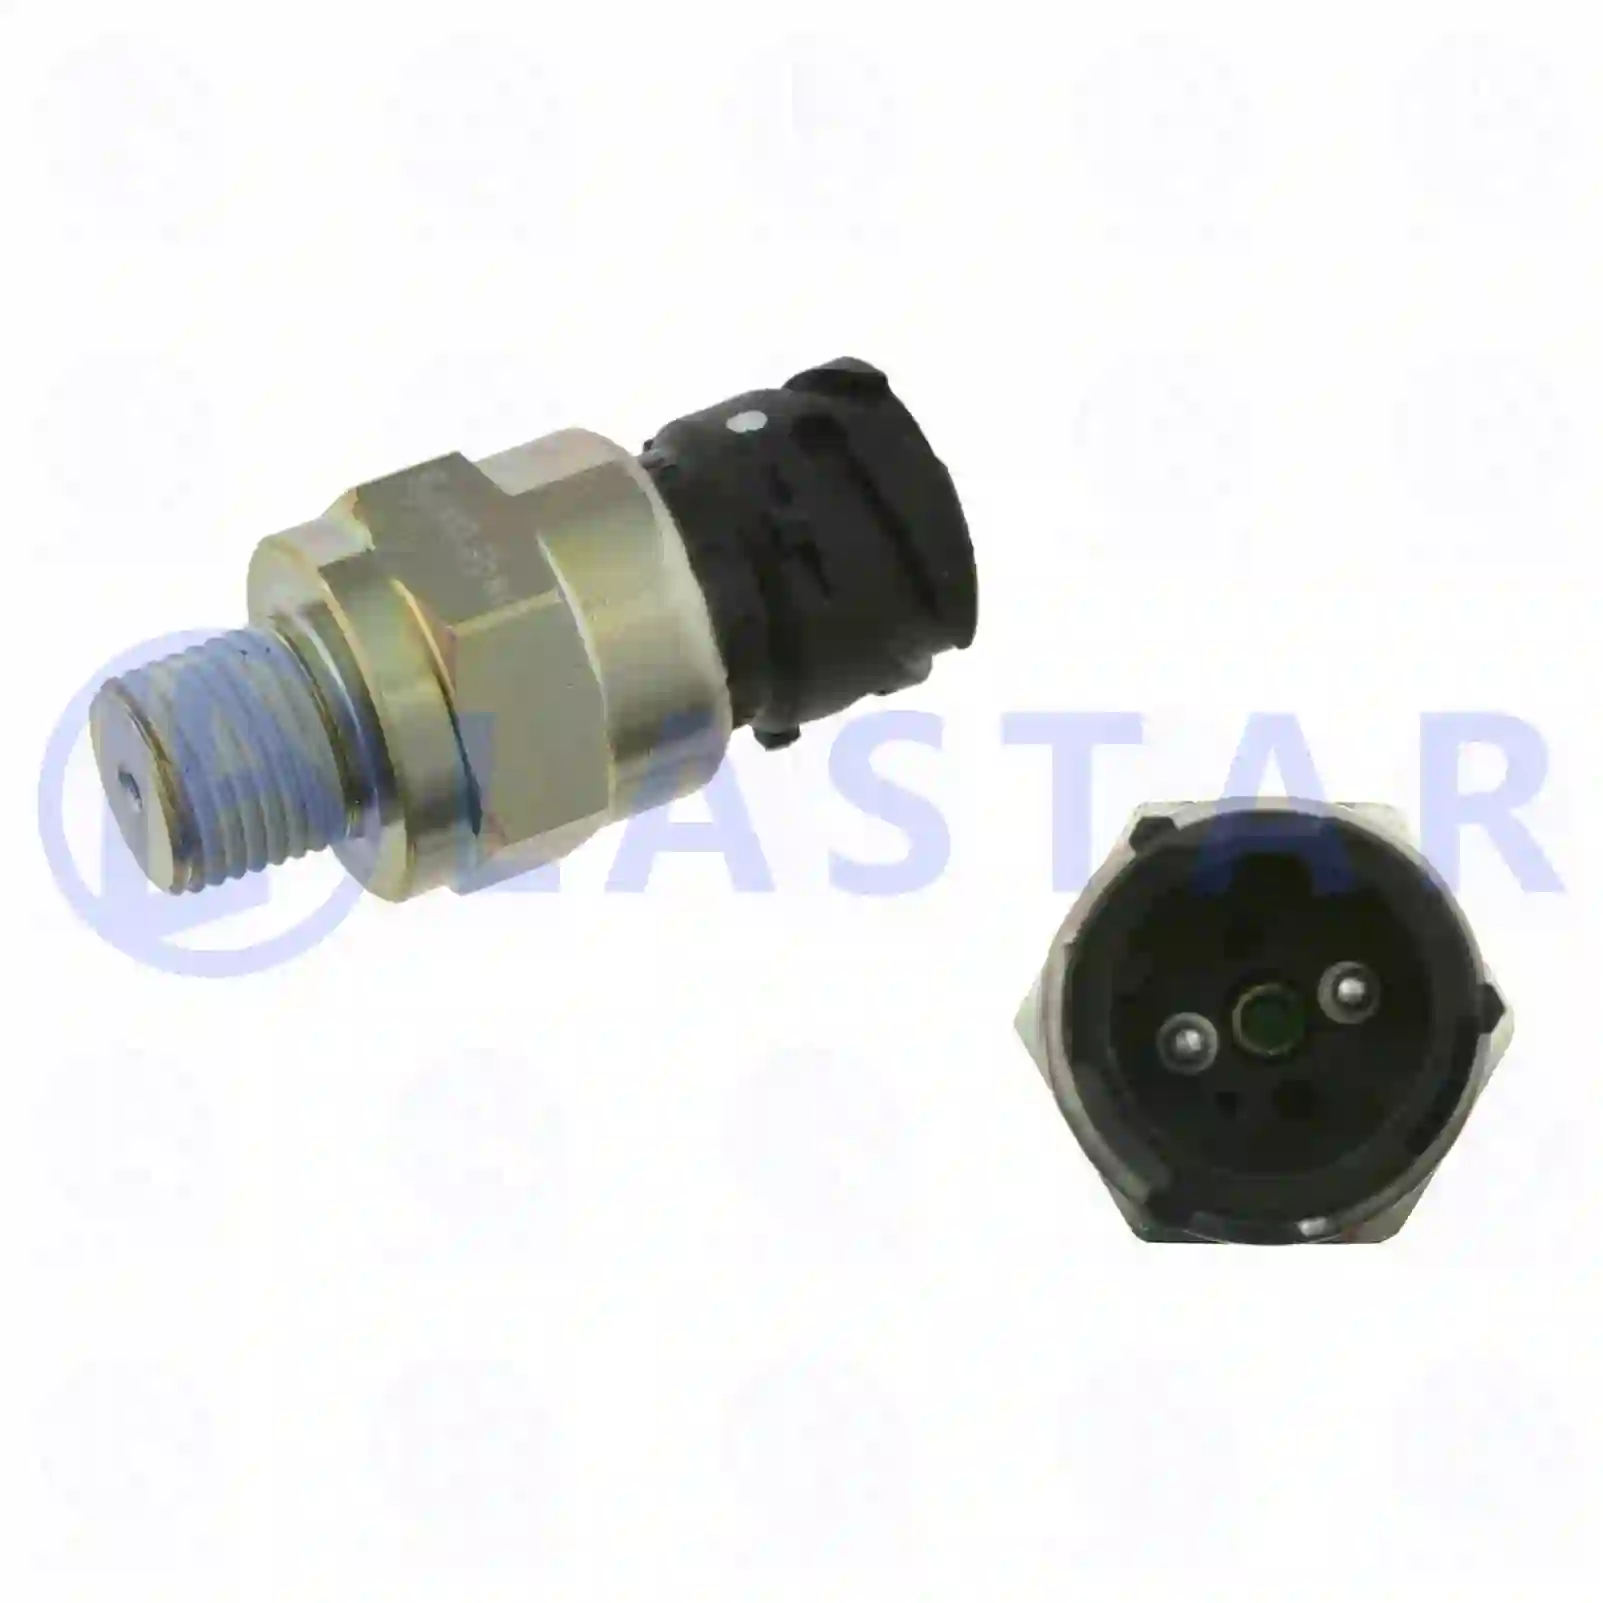 Cooling System Pressure switch, with adapter cable, la no: 77707622 ,  oem no:1087963, 1594040, 1622986, ZG20761-0008 Lastar Spare Part | Truck Spare Parts, Auotomotive Spare Parts